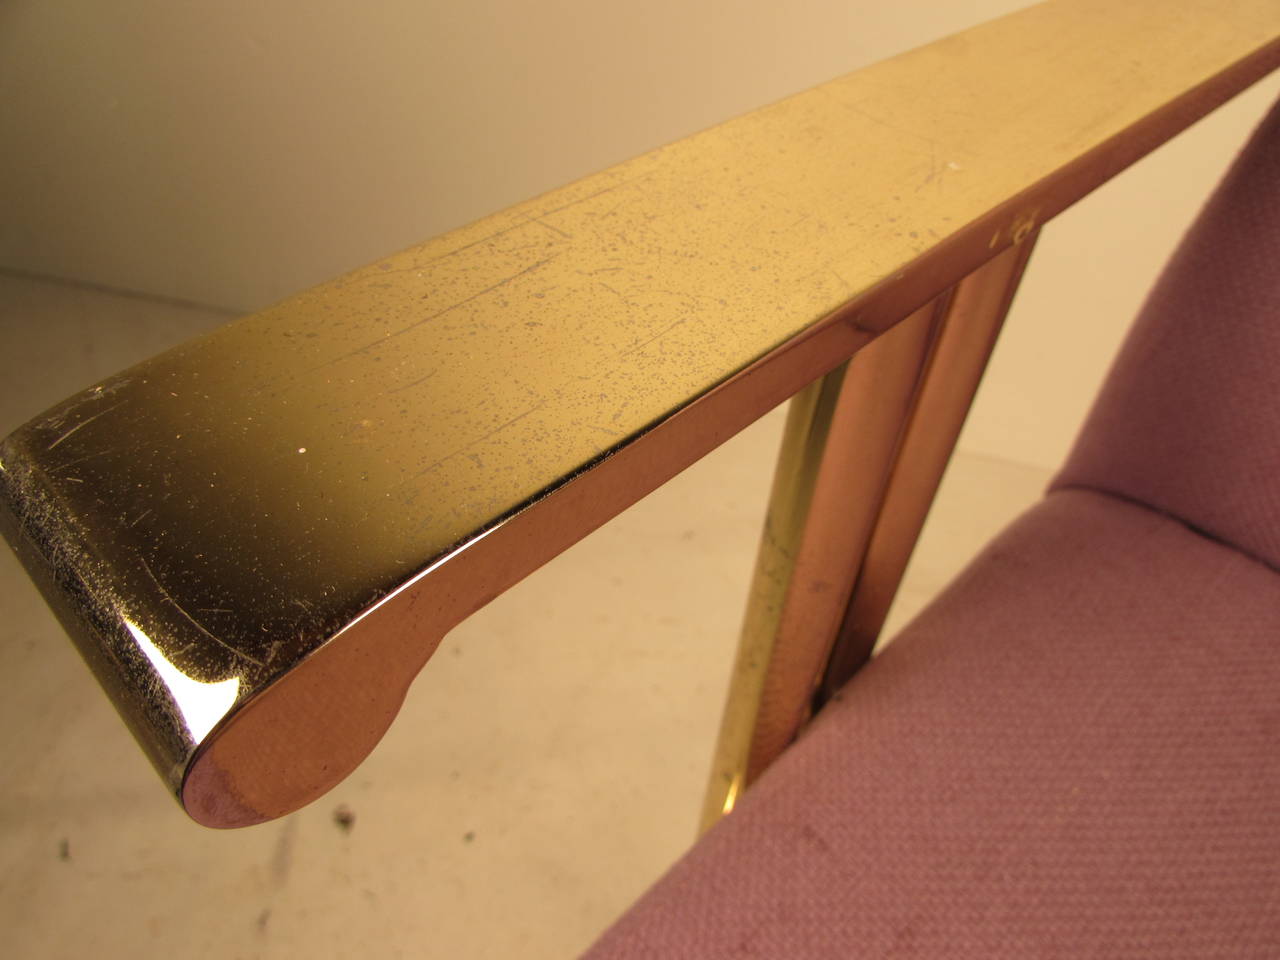 American Architectural Brass Desk Chair By Directional (3 Available)